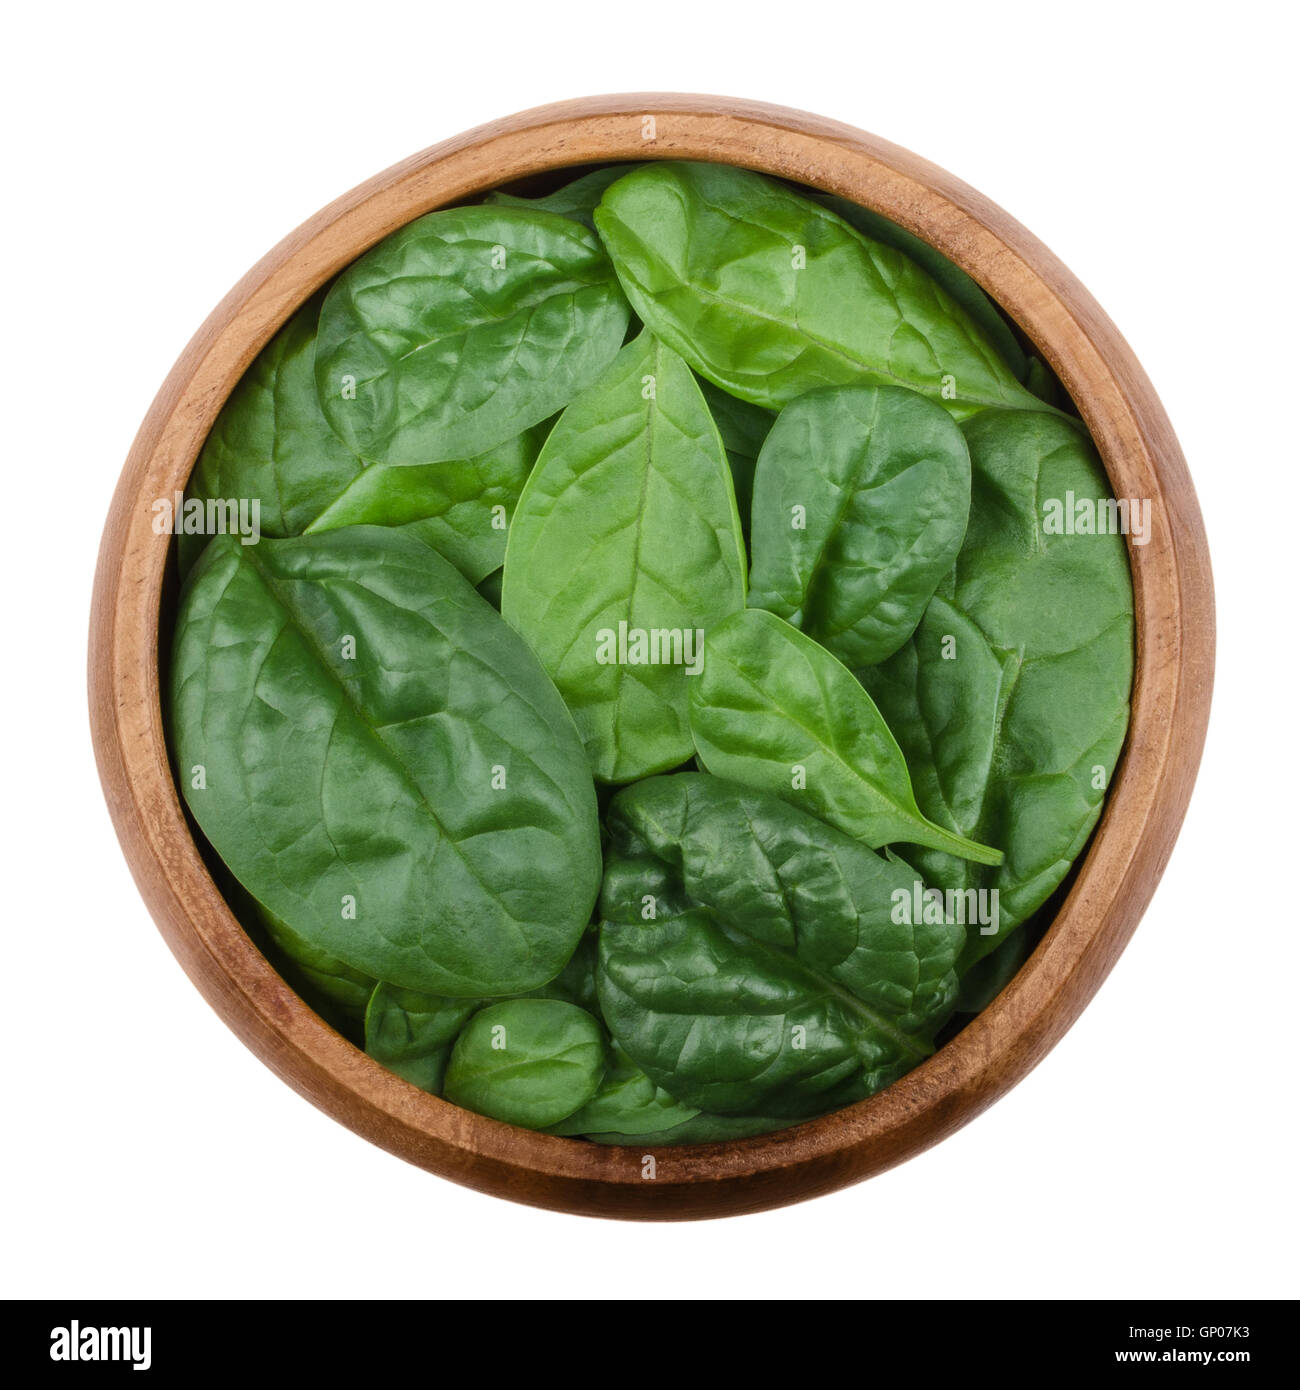 Fresh green spinach leaves in a wooden bowl on white background. Spinacia oleracea, edible flowering plant. Stock Photo